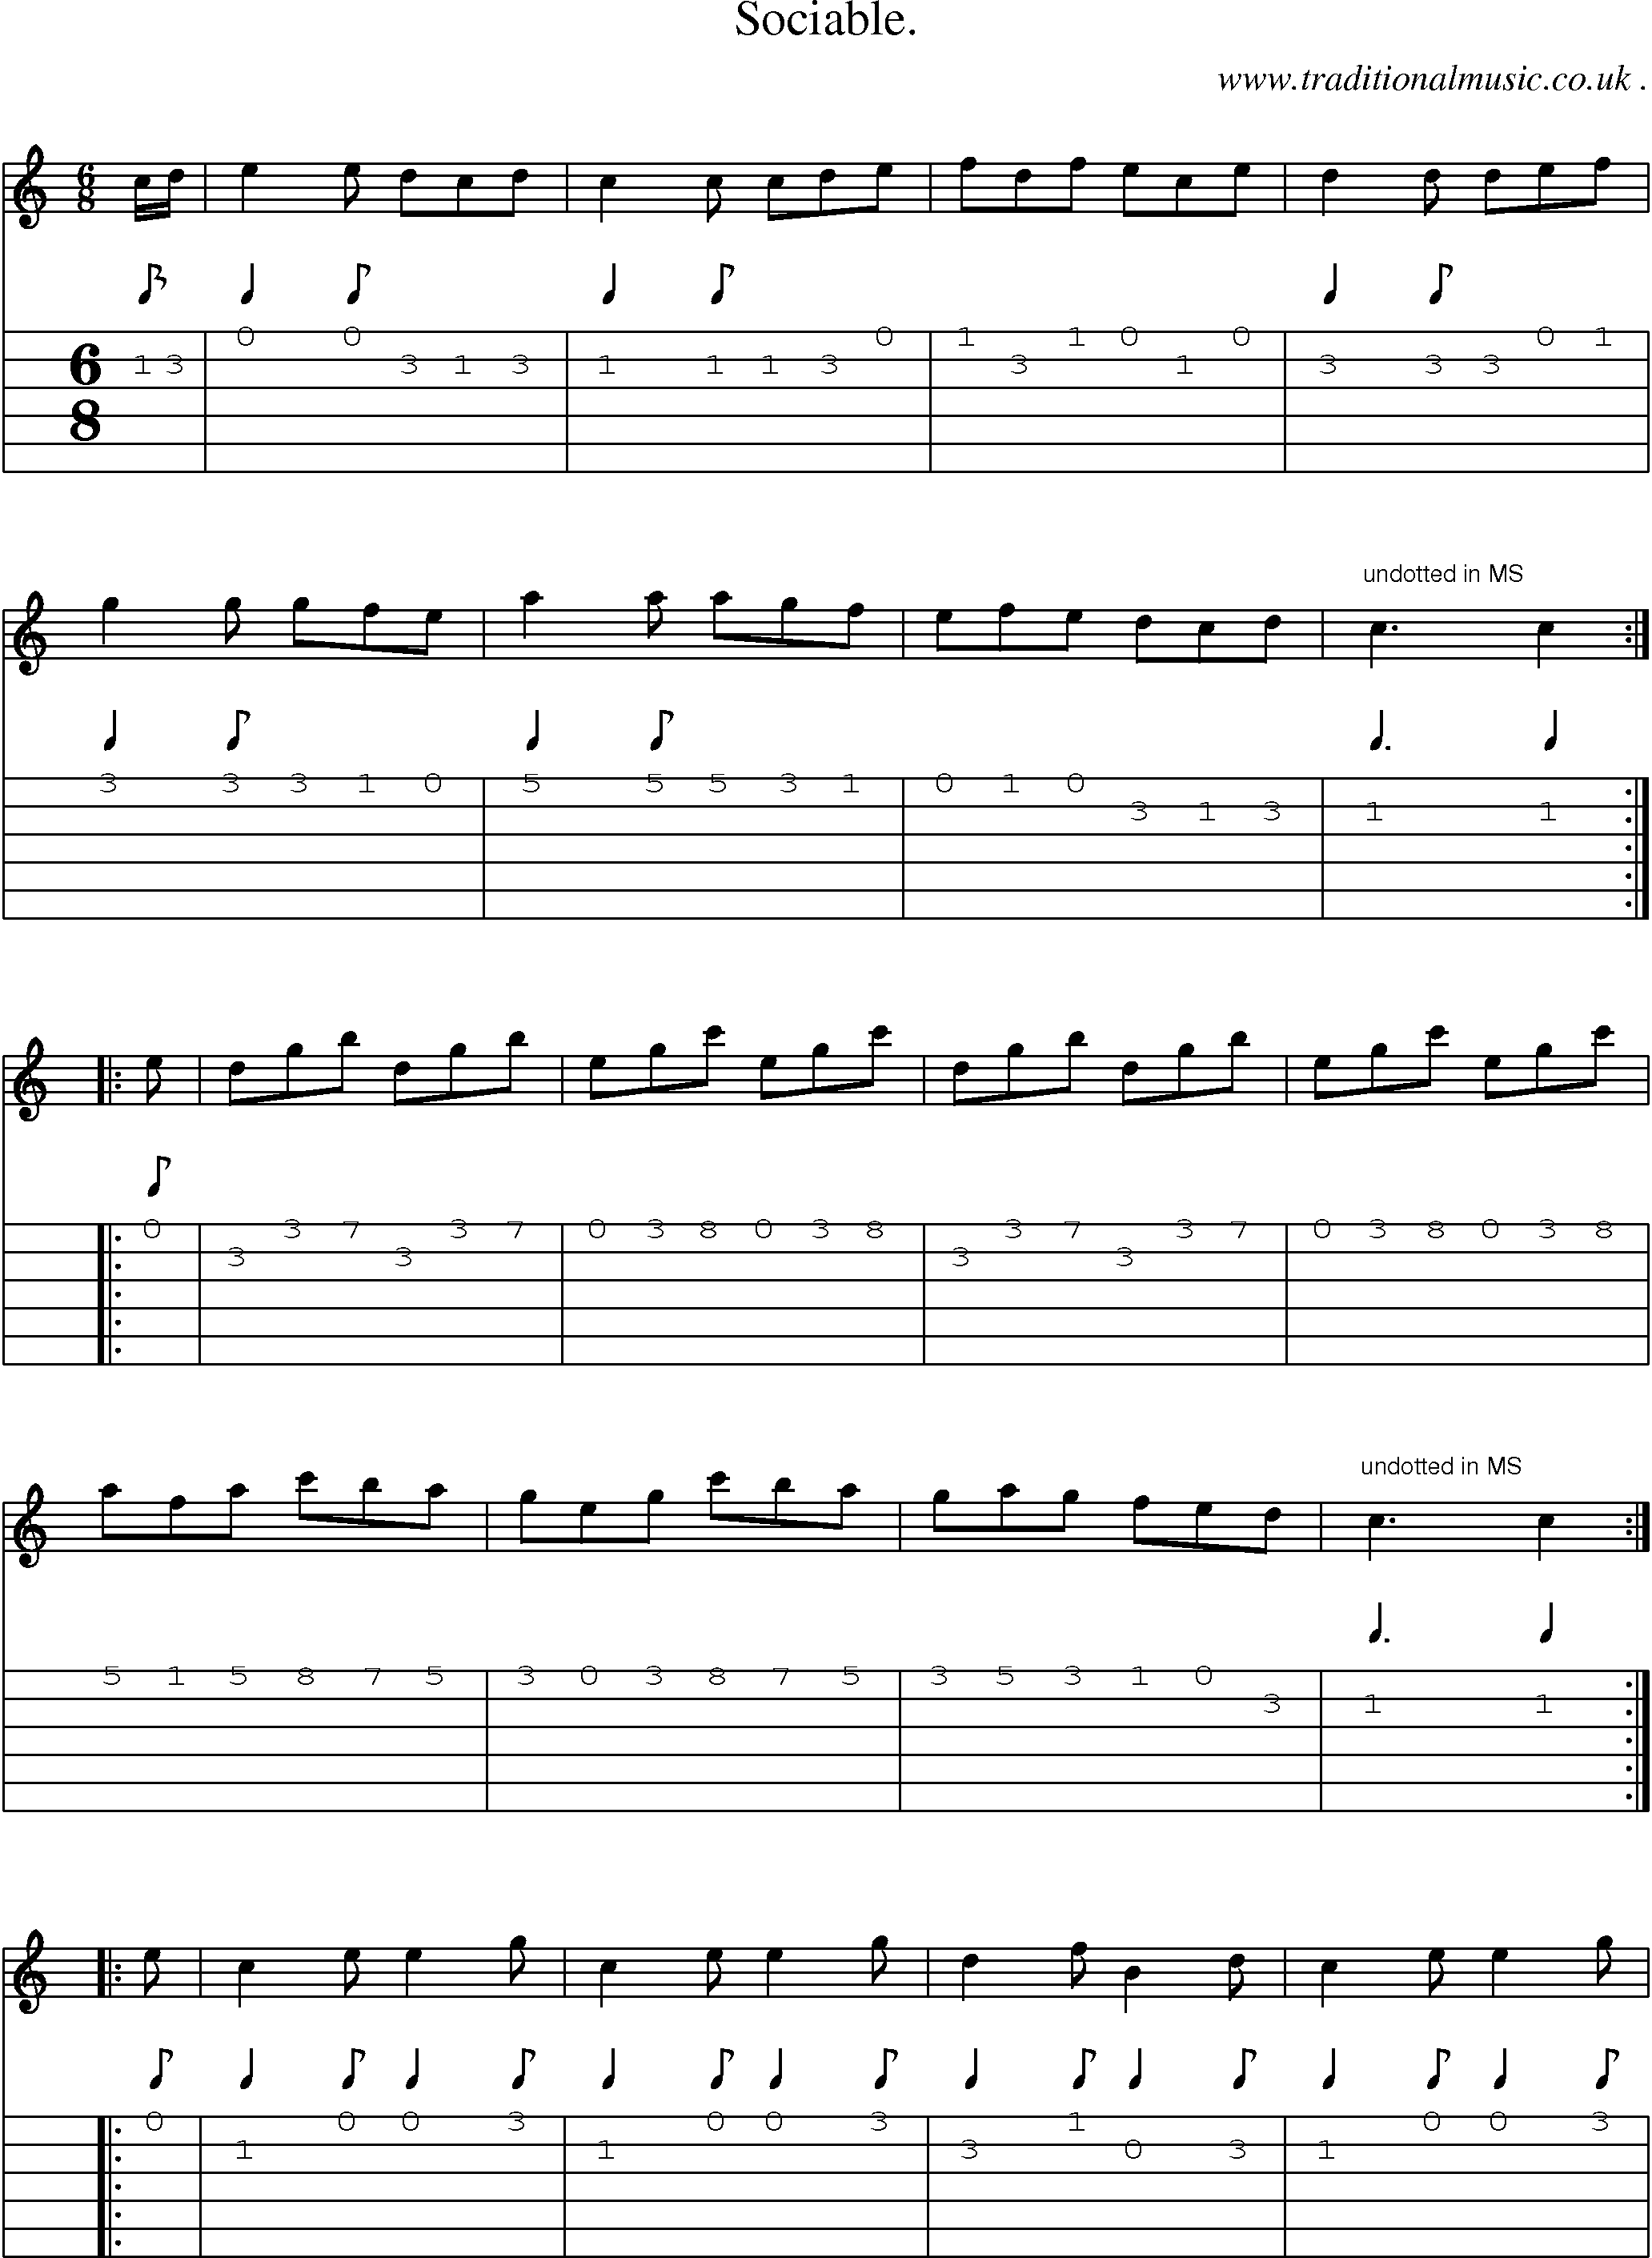 Sheet-Music and Guitar Tabs for Sociable